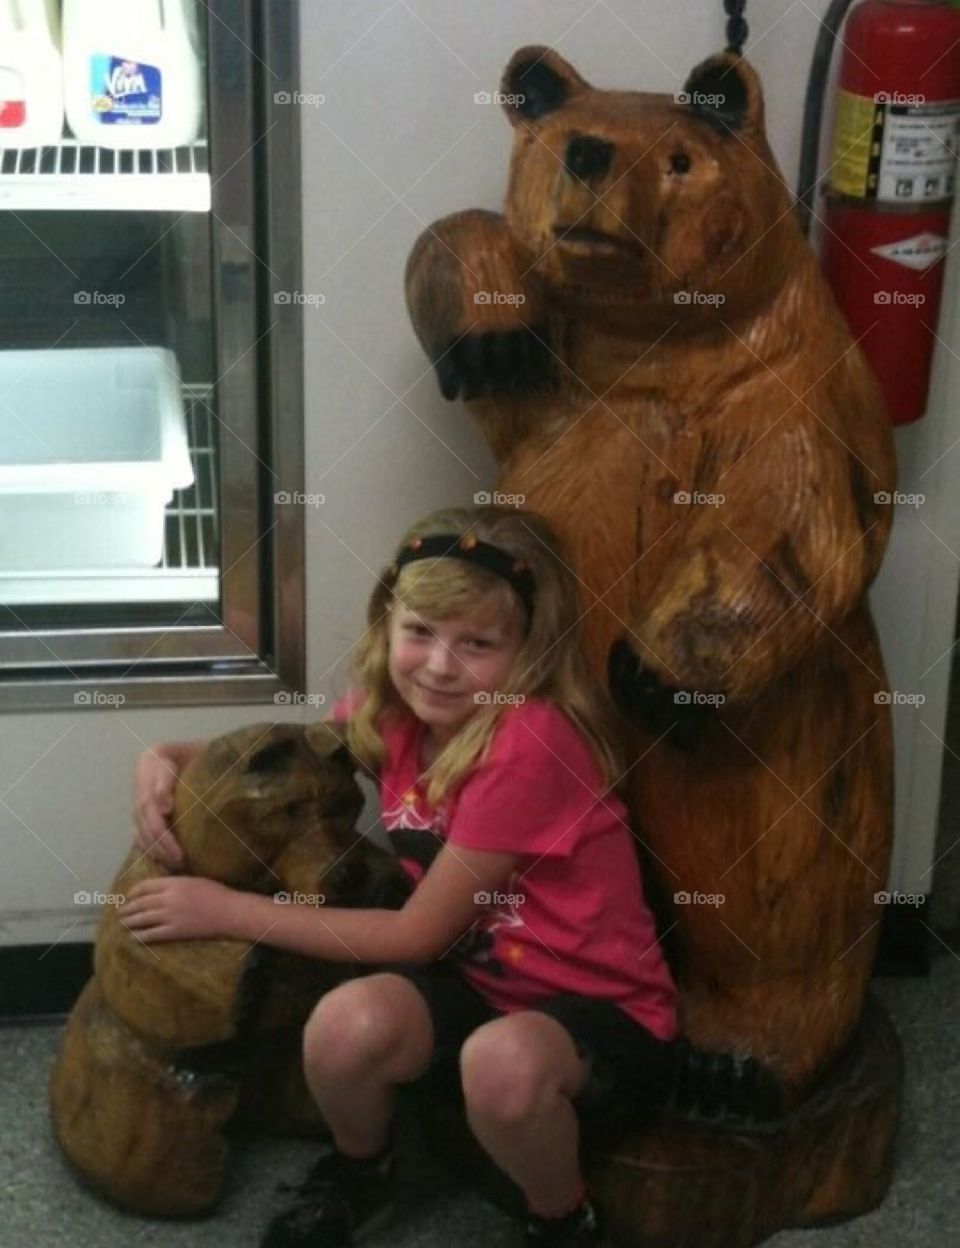 She love animals, whether alive or not. Sweet cuddly honey bears at Gosner’s cheese factory in Wellsville, UT.